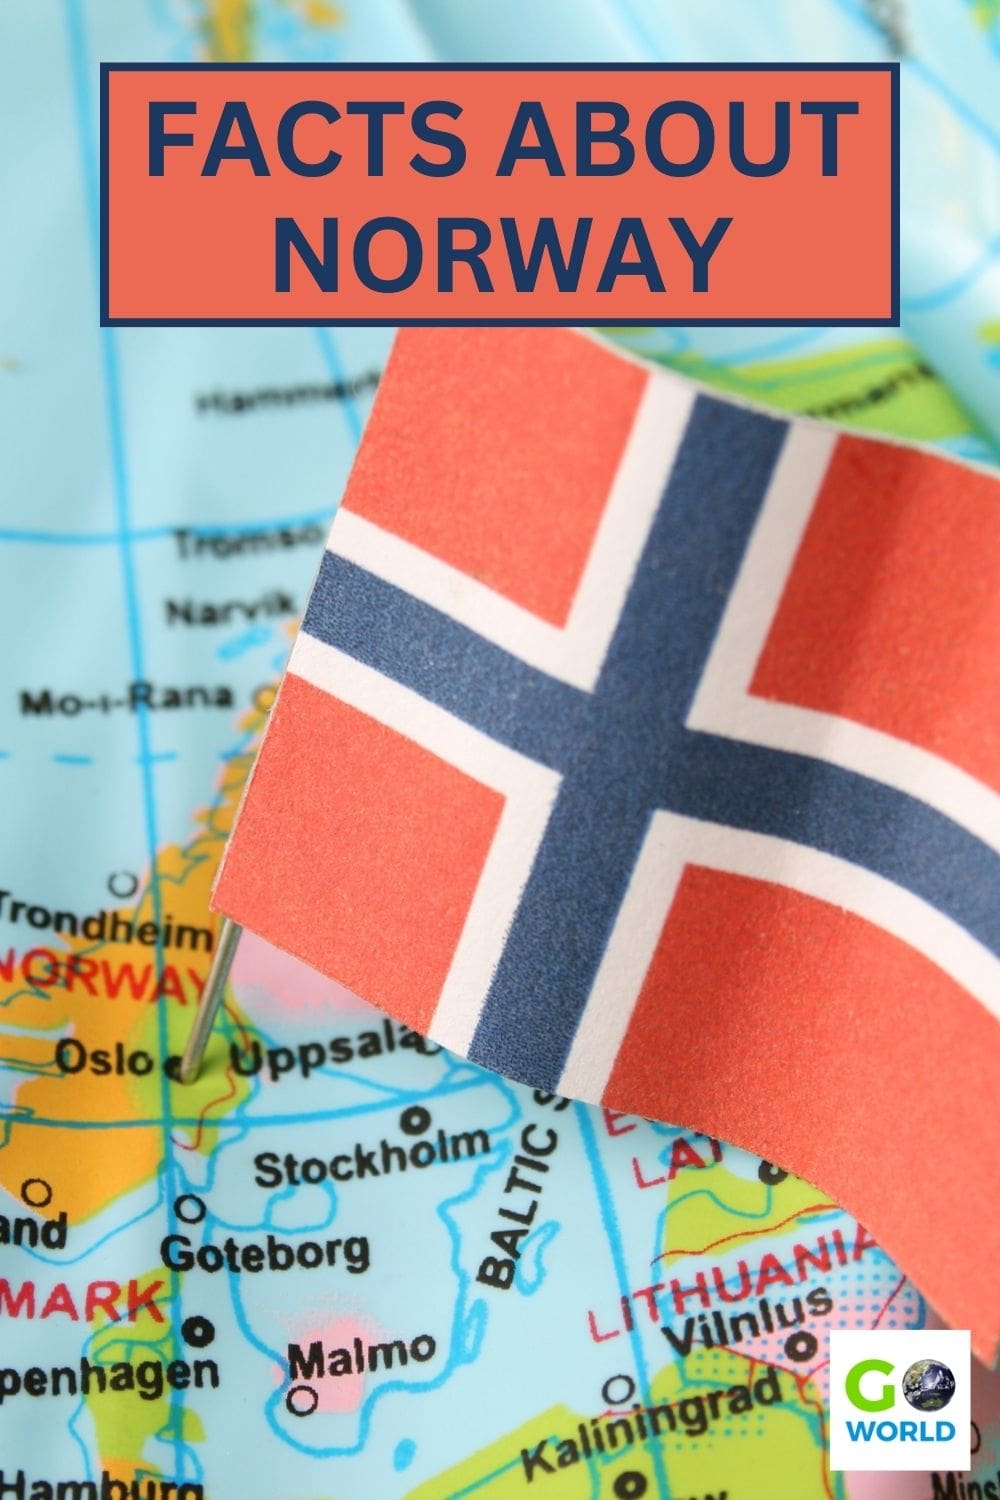 Want to know why Norwegians are the happiest people on earth? Here are some fascinating facts about Norway you should know before you go. #Norway #Oslonorway